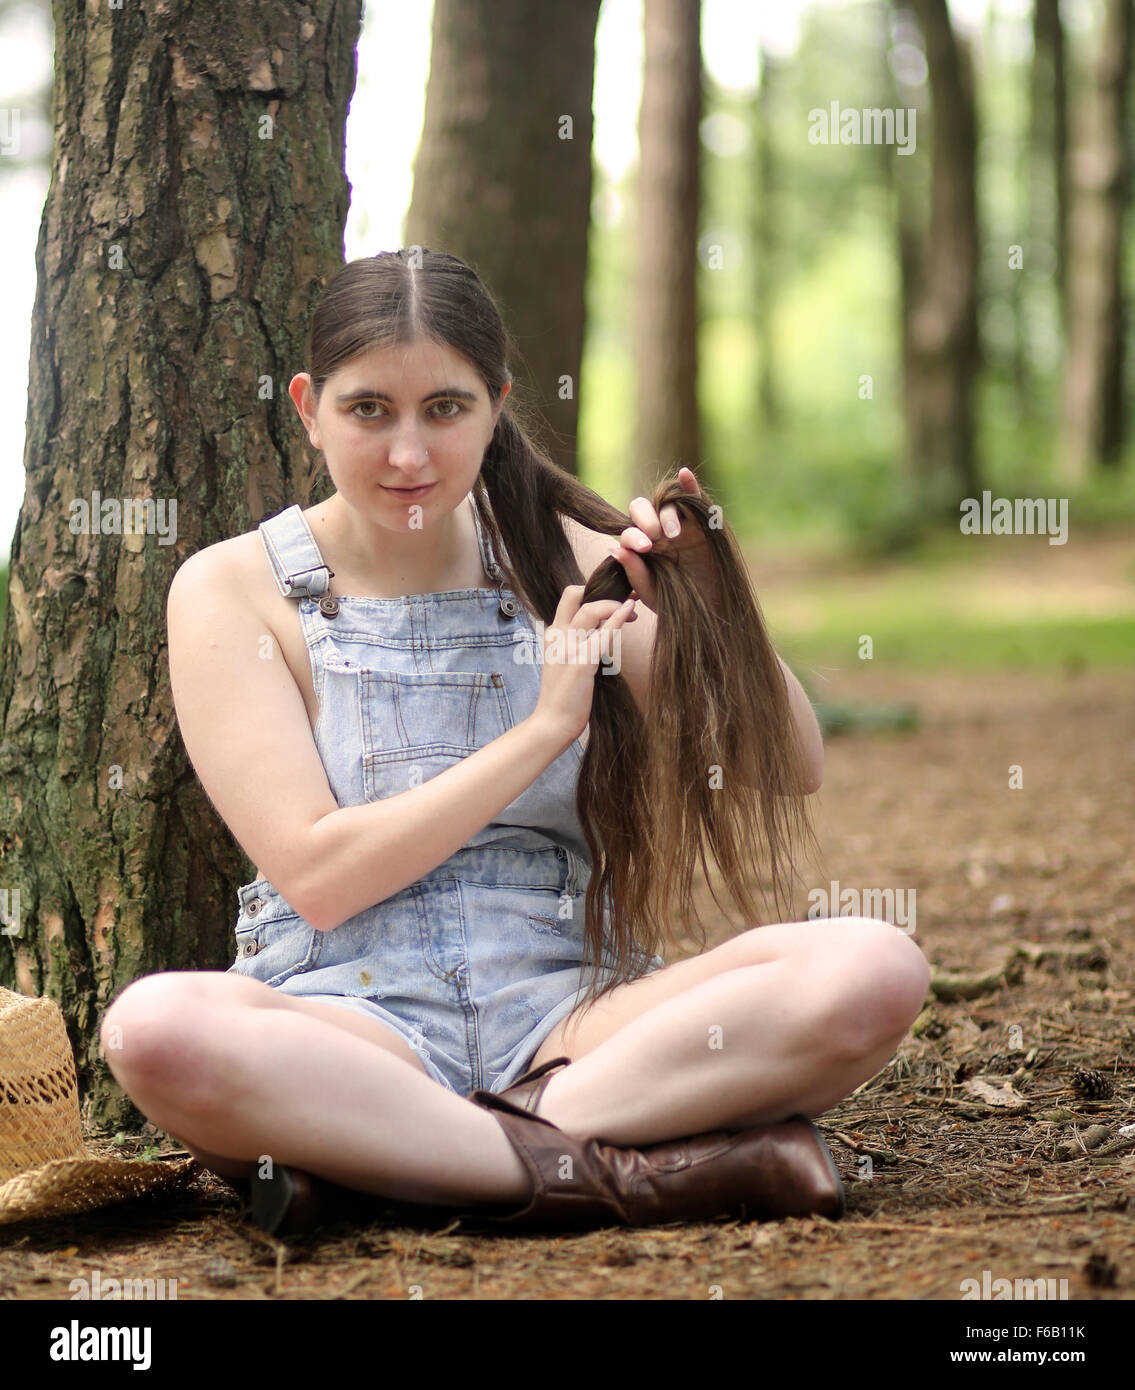 Country backwoods girl in old cut dungaree shorts in the woods, July 2014  Stock Photo - Alamy